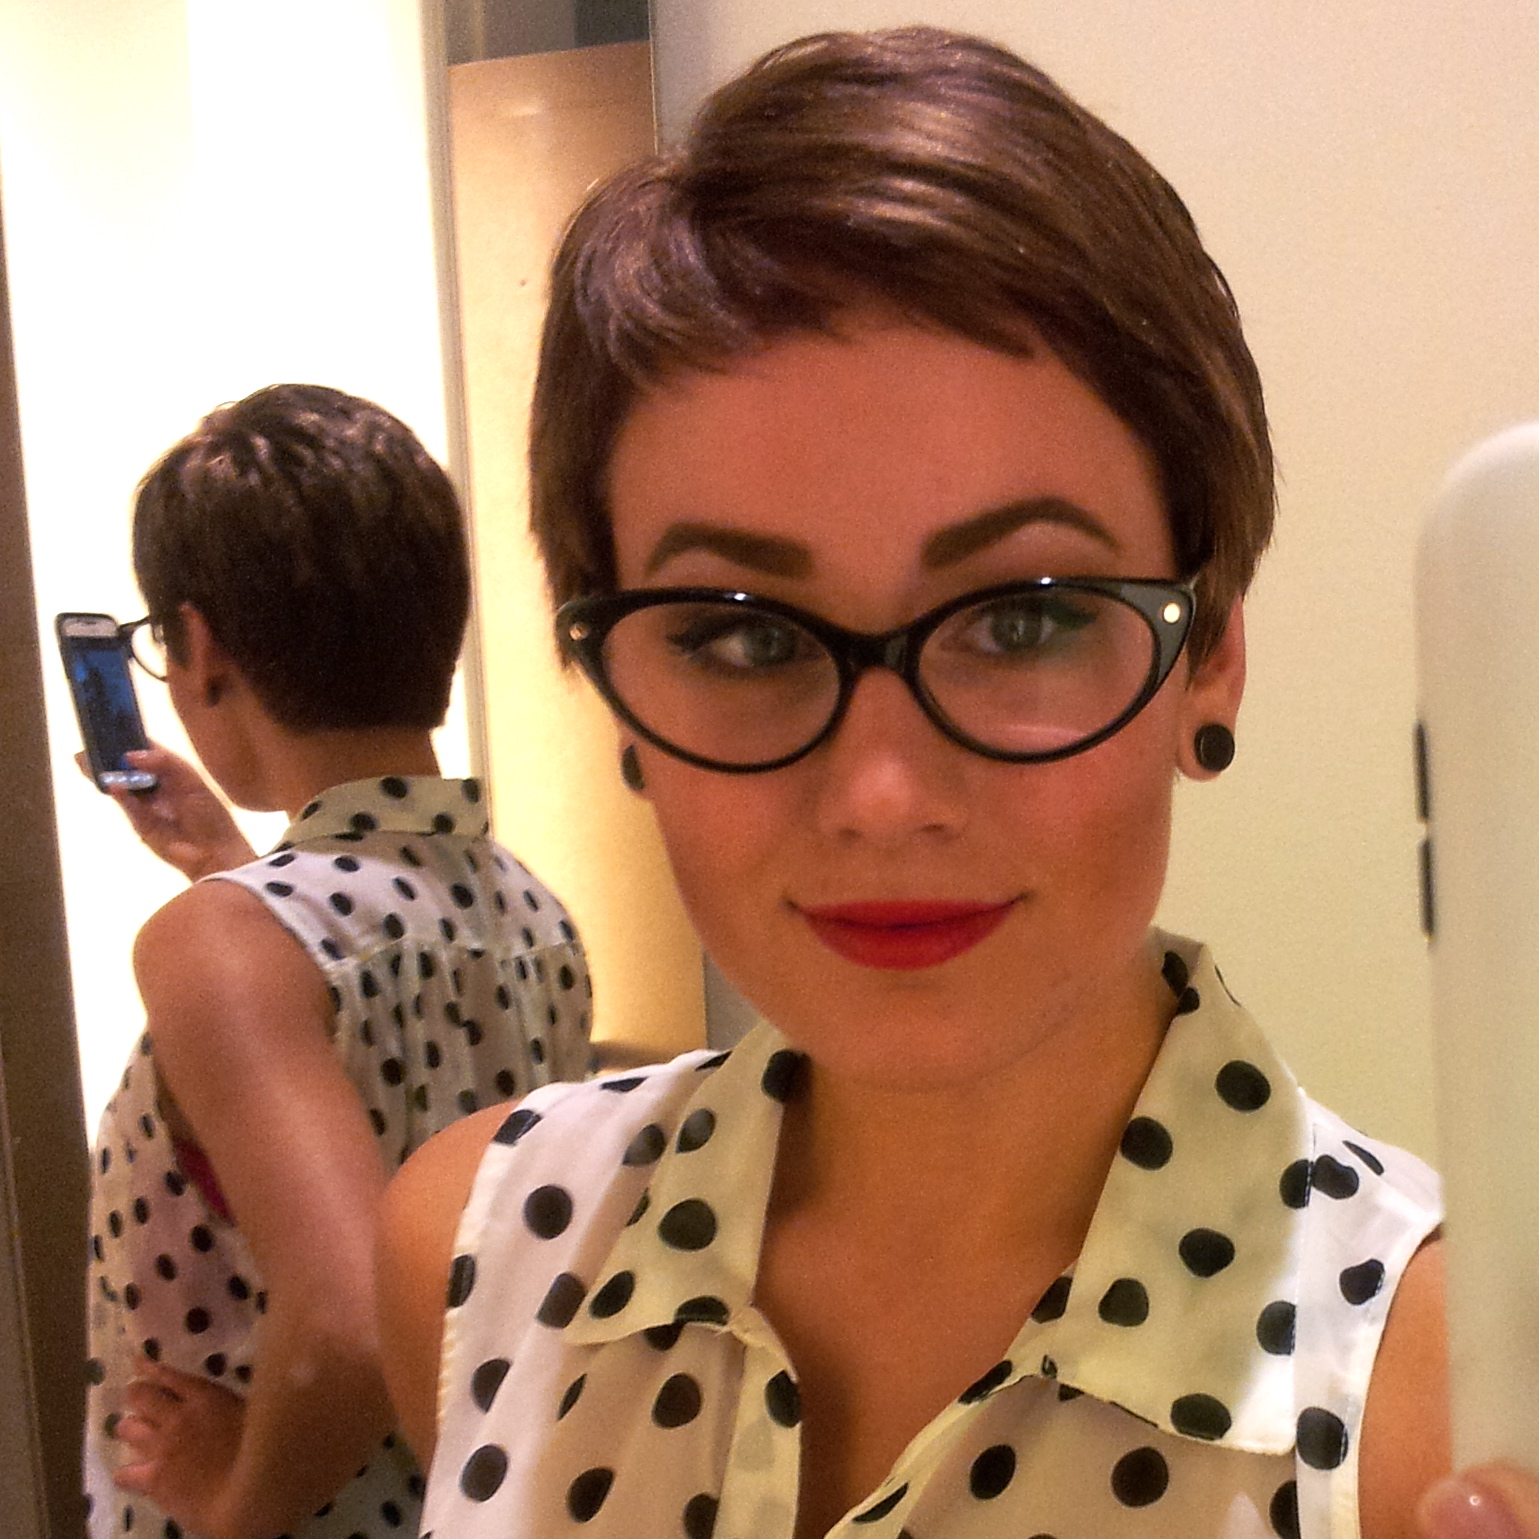 How To Grow Out A Pixie Haircut Hello Quarterlife Crisis